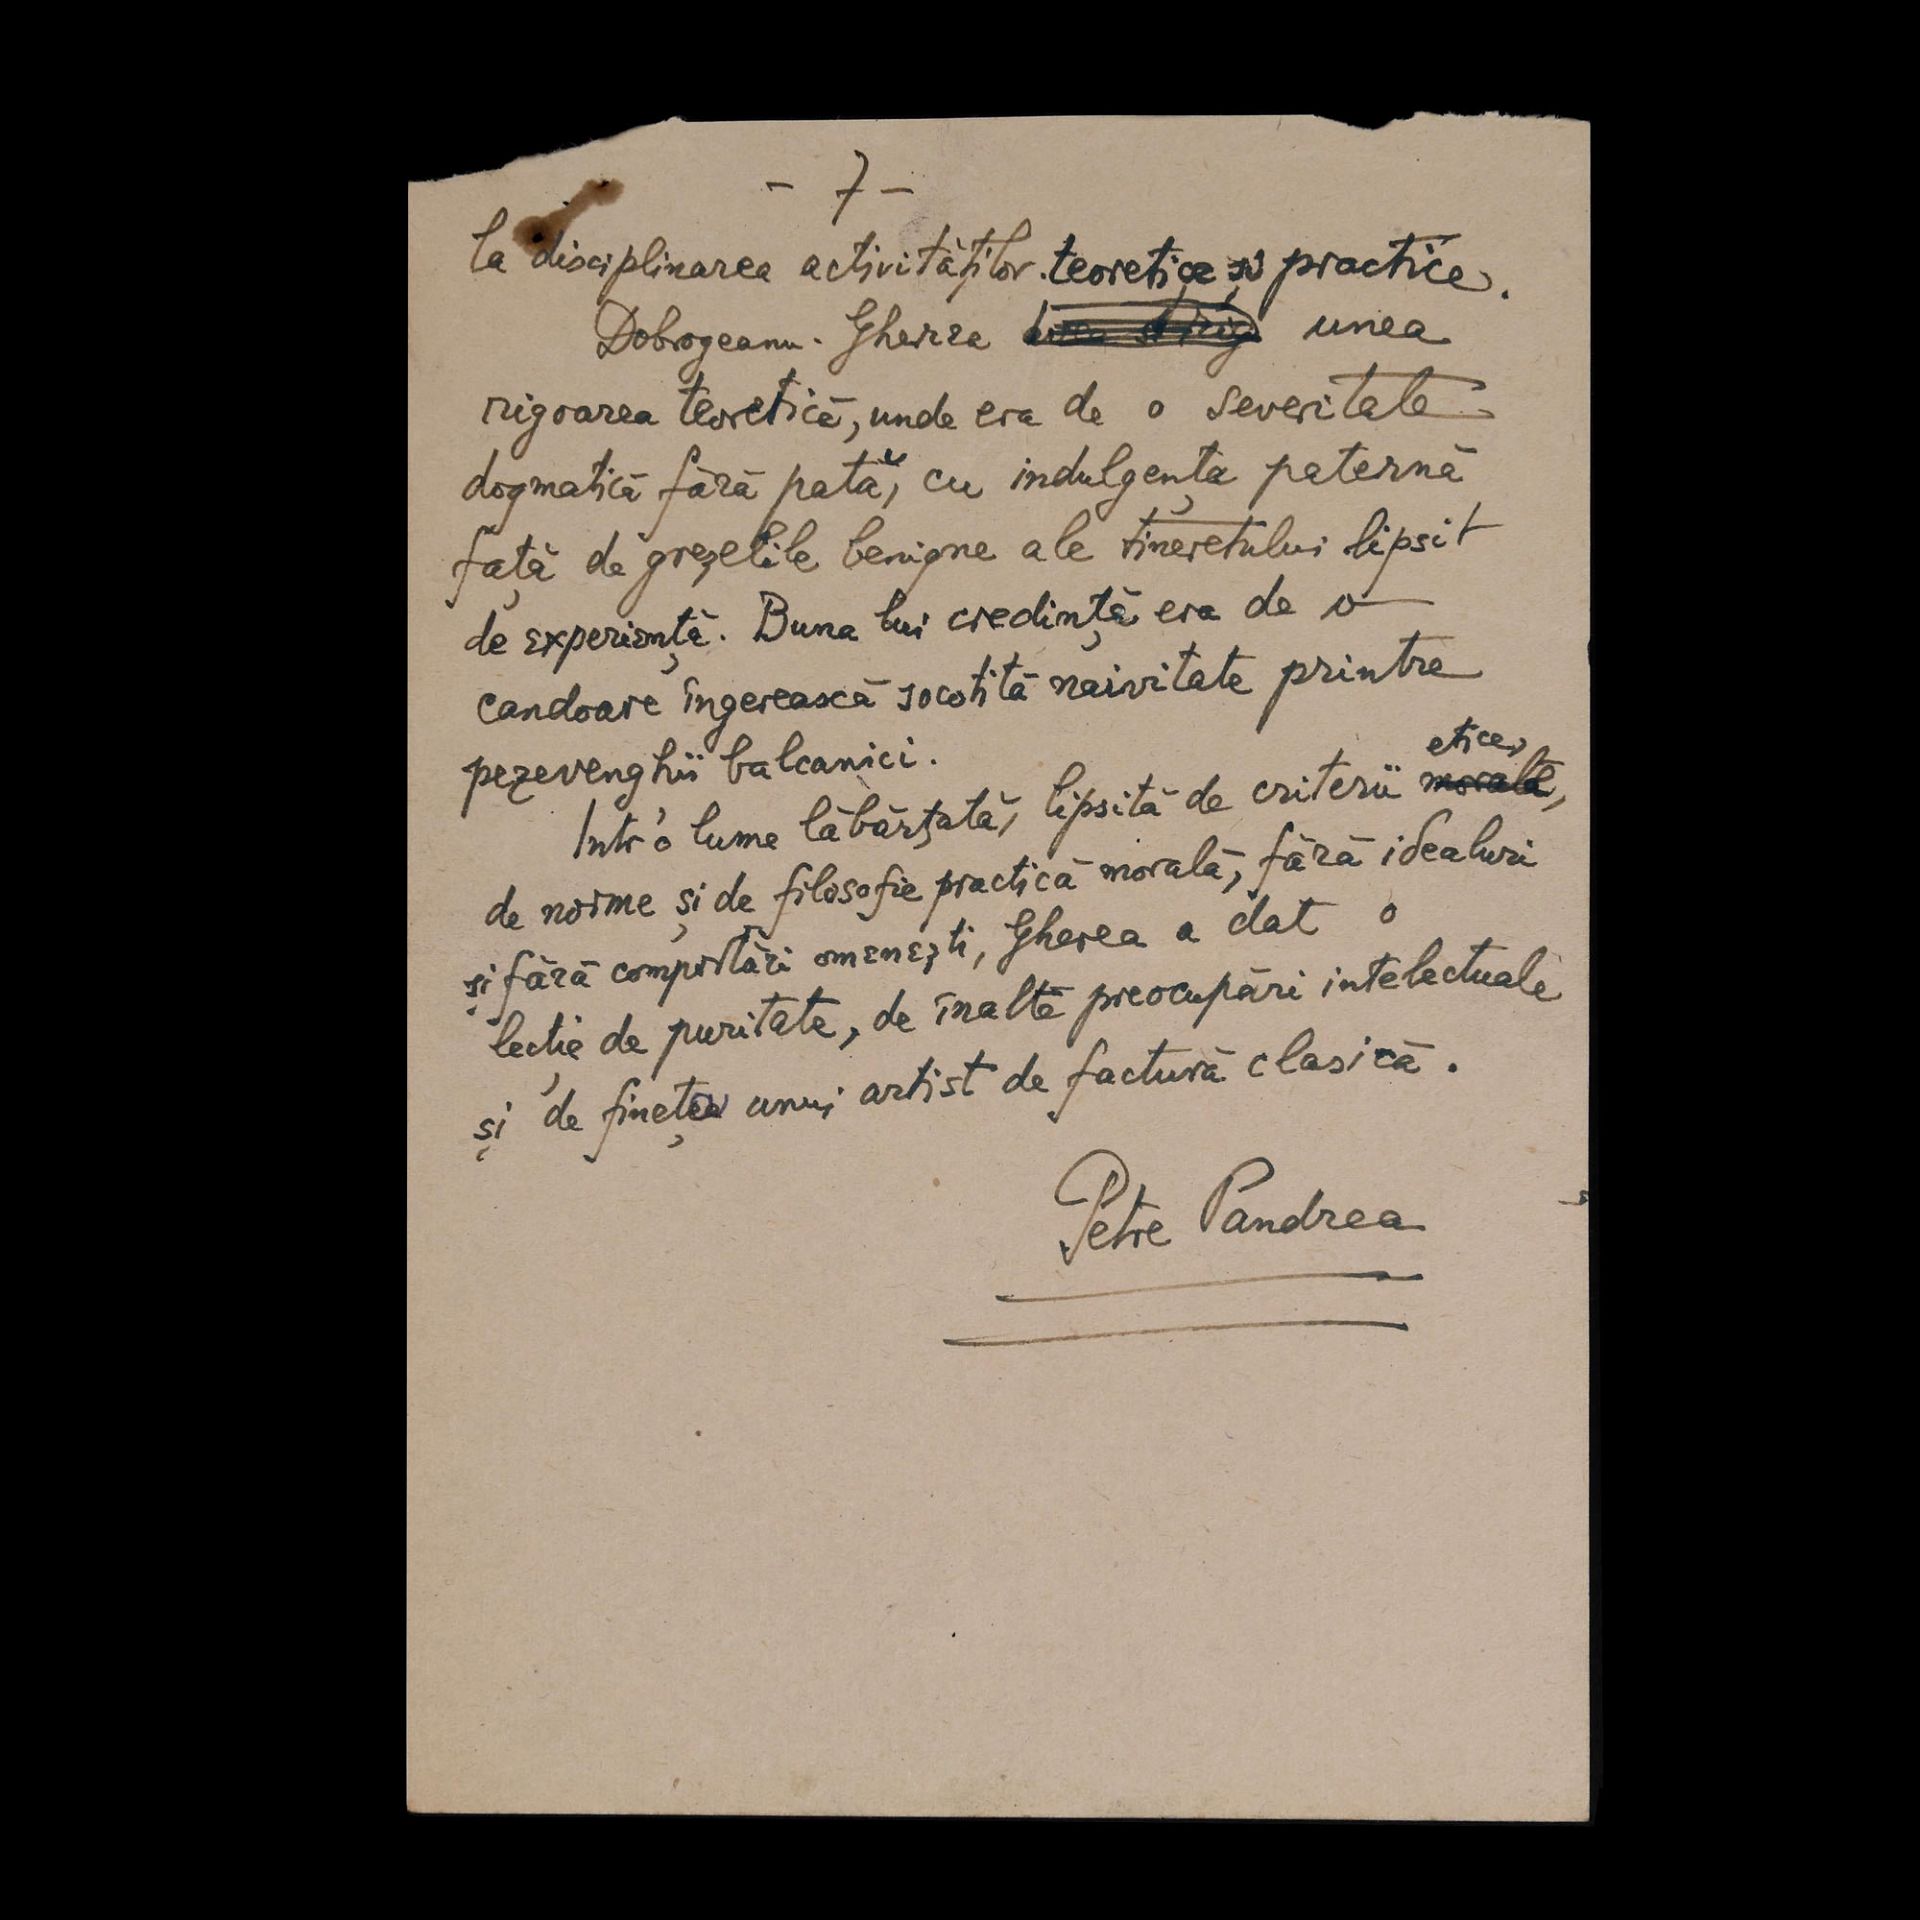 The manuscript of the article "Constatin Dobrogeanu Gherea", by Petre Pandrea, published in Orizont - Image 6 of 6